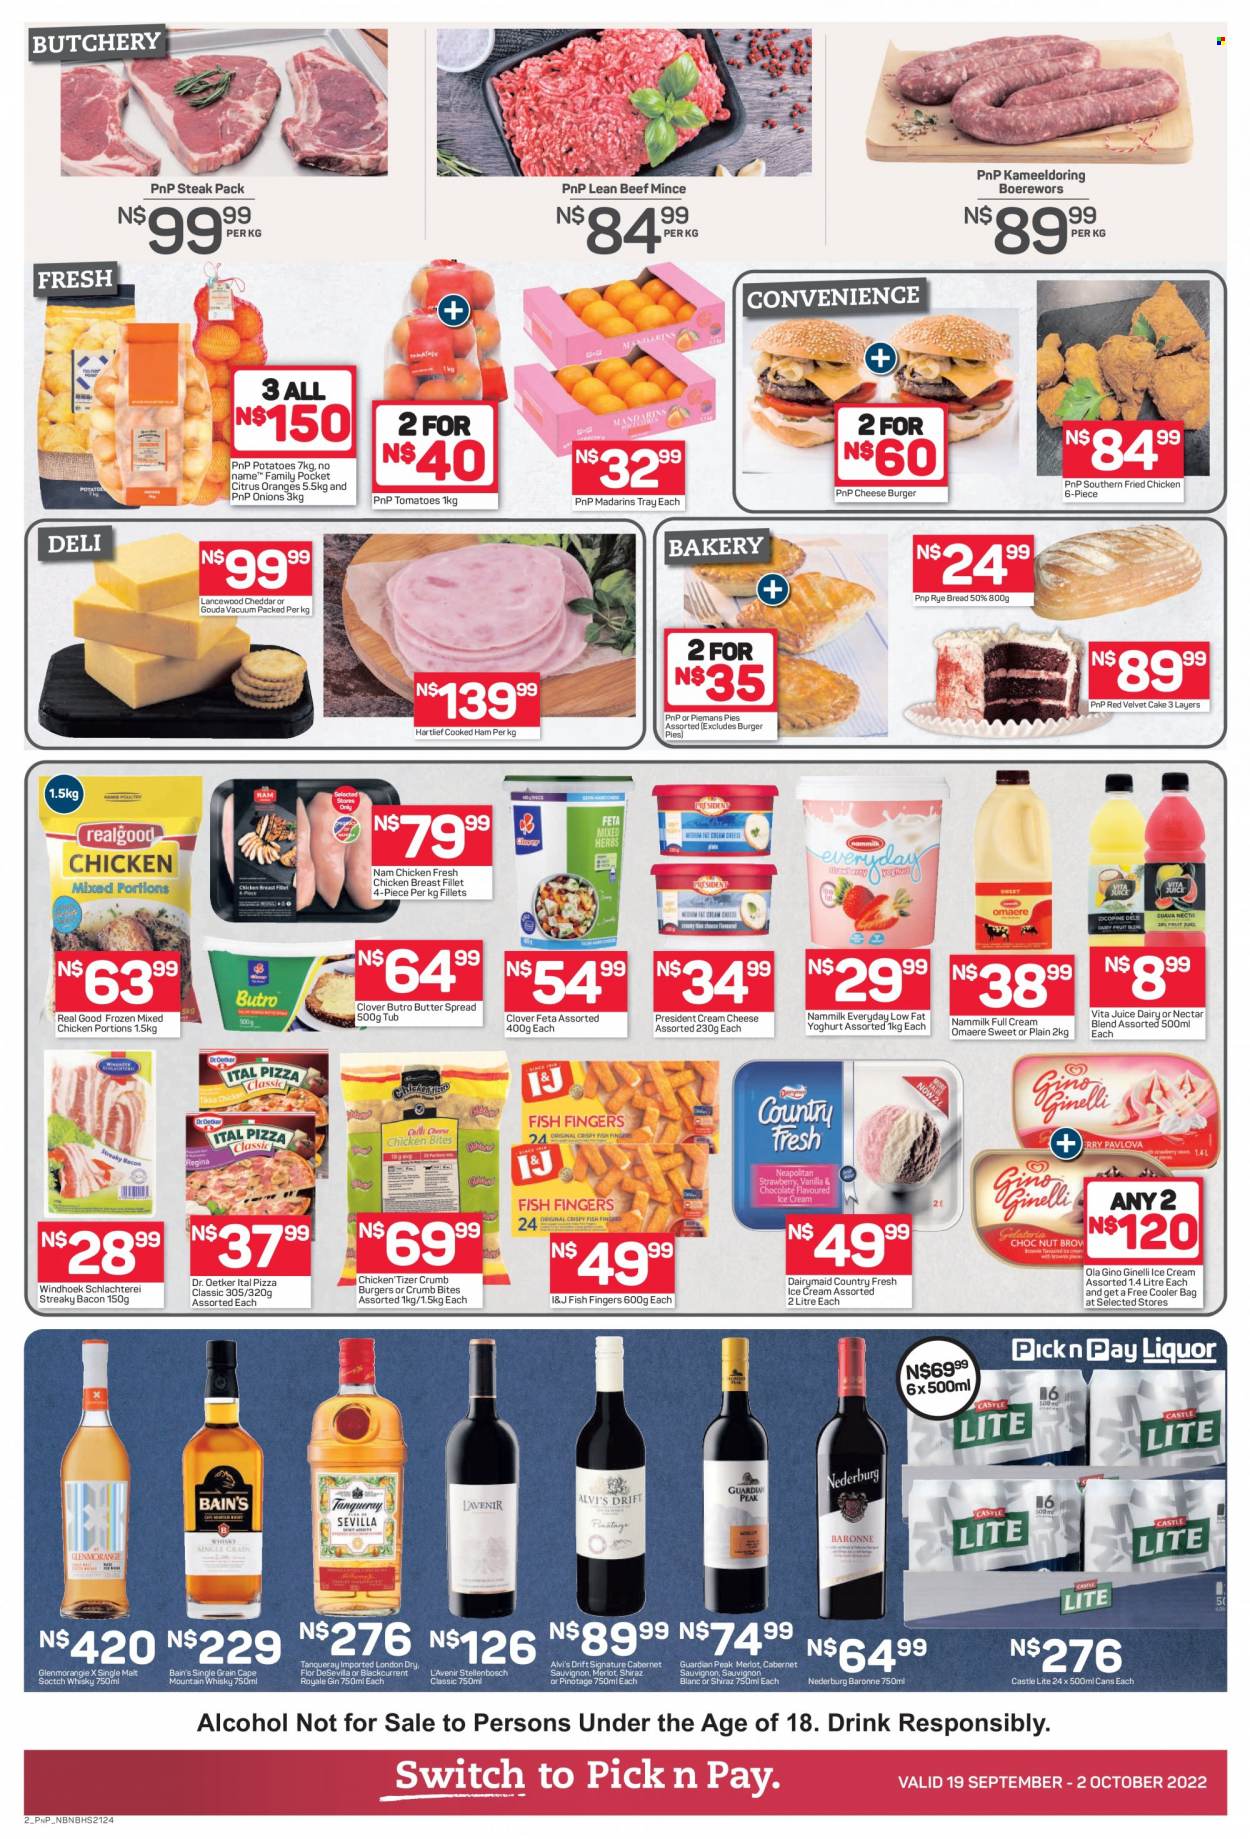 Pick n Pay catalogue  - 19/09/2022 - 02/10/2022 - Sales products - bread, cake, Pieman's, potatoes, onion, orange, fish, fish fingers, fish sticks, pizza, hamburger, fried chicken, bacon, cooked ham, ham, streaky bacon, cream cheese, gouda, cheddar, Dr. Oetker, Lancewood, Président, feta cheese, yoghurt, Clover, butter, ice cream, Gino Ginelli, Ola, Ital Pizza, switch, juice, Cabernet Sauvignon, red wine, white wine, Merlot, Nederburg, alcohol, Shiraz, Sauvignon Blanc, gin, whisky, Castle, chicken breasts, chicken meat, beef meat, ground beef, steak, braai wors. Page 3.